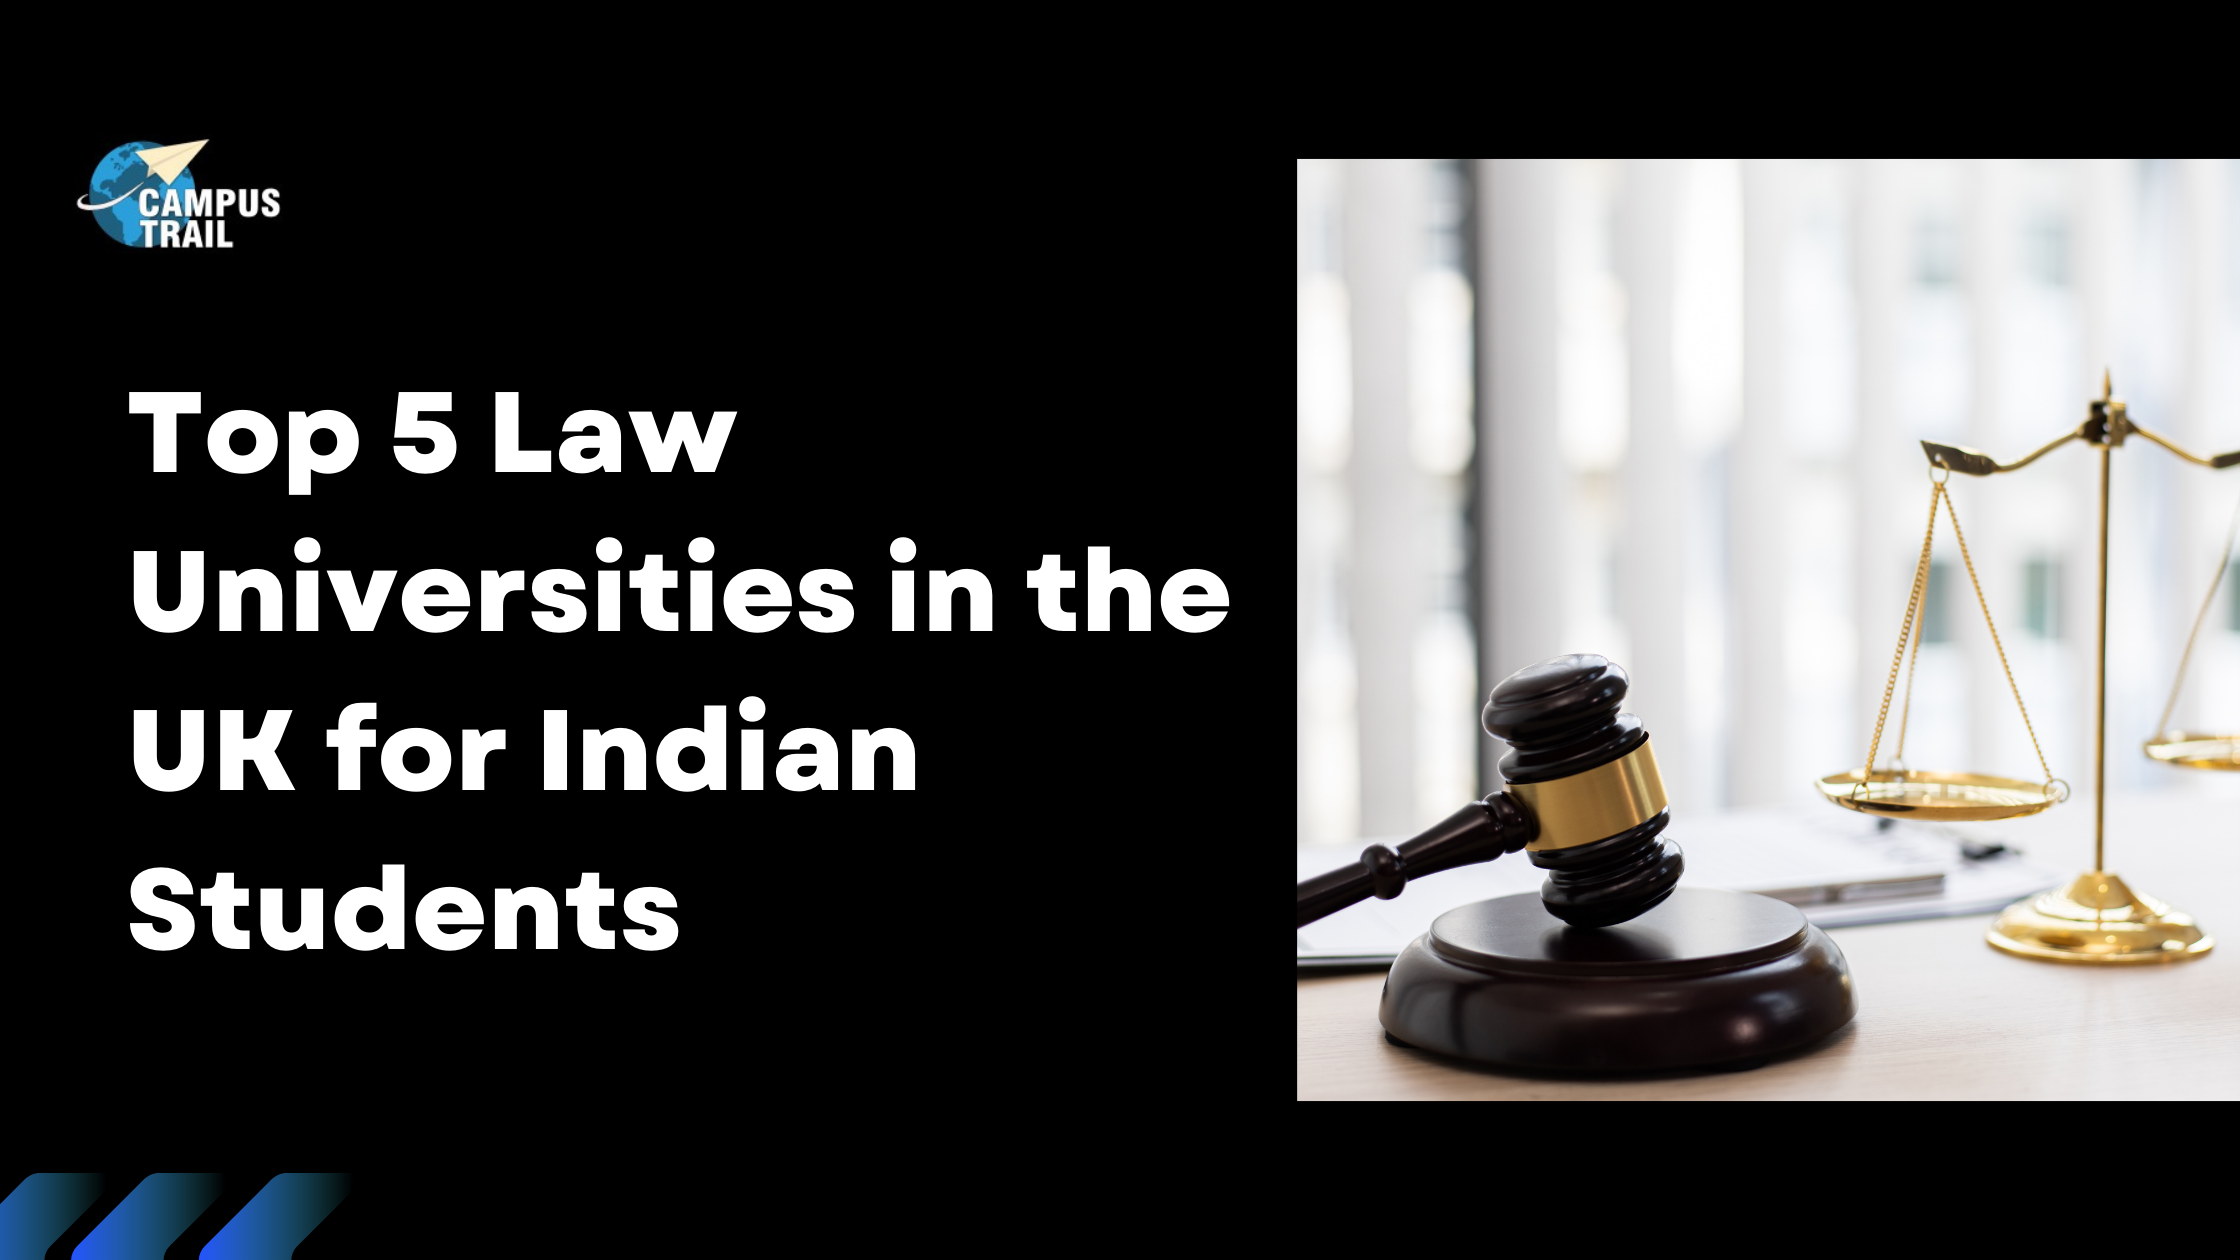 Top 5 Law Universities in the UK for Indian Students